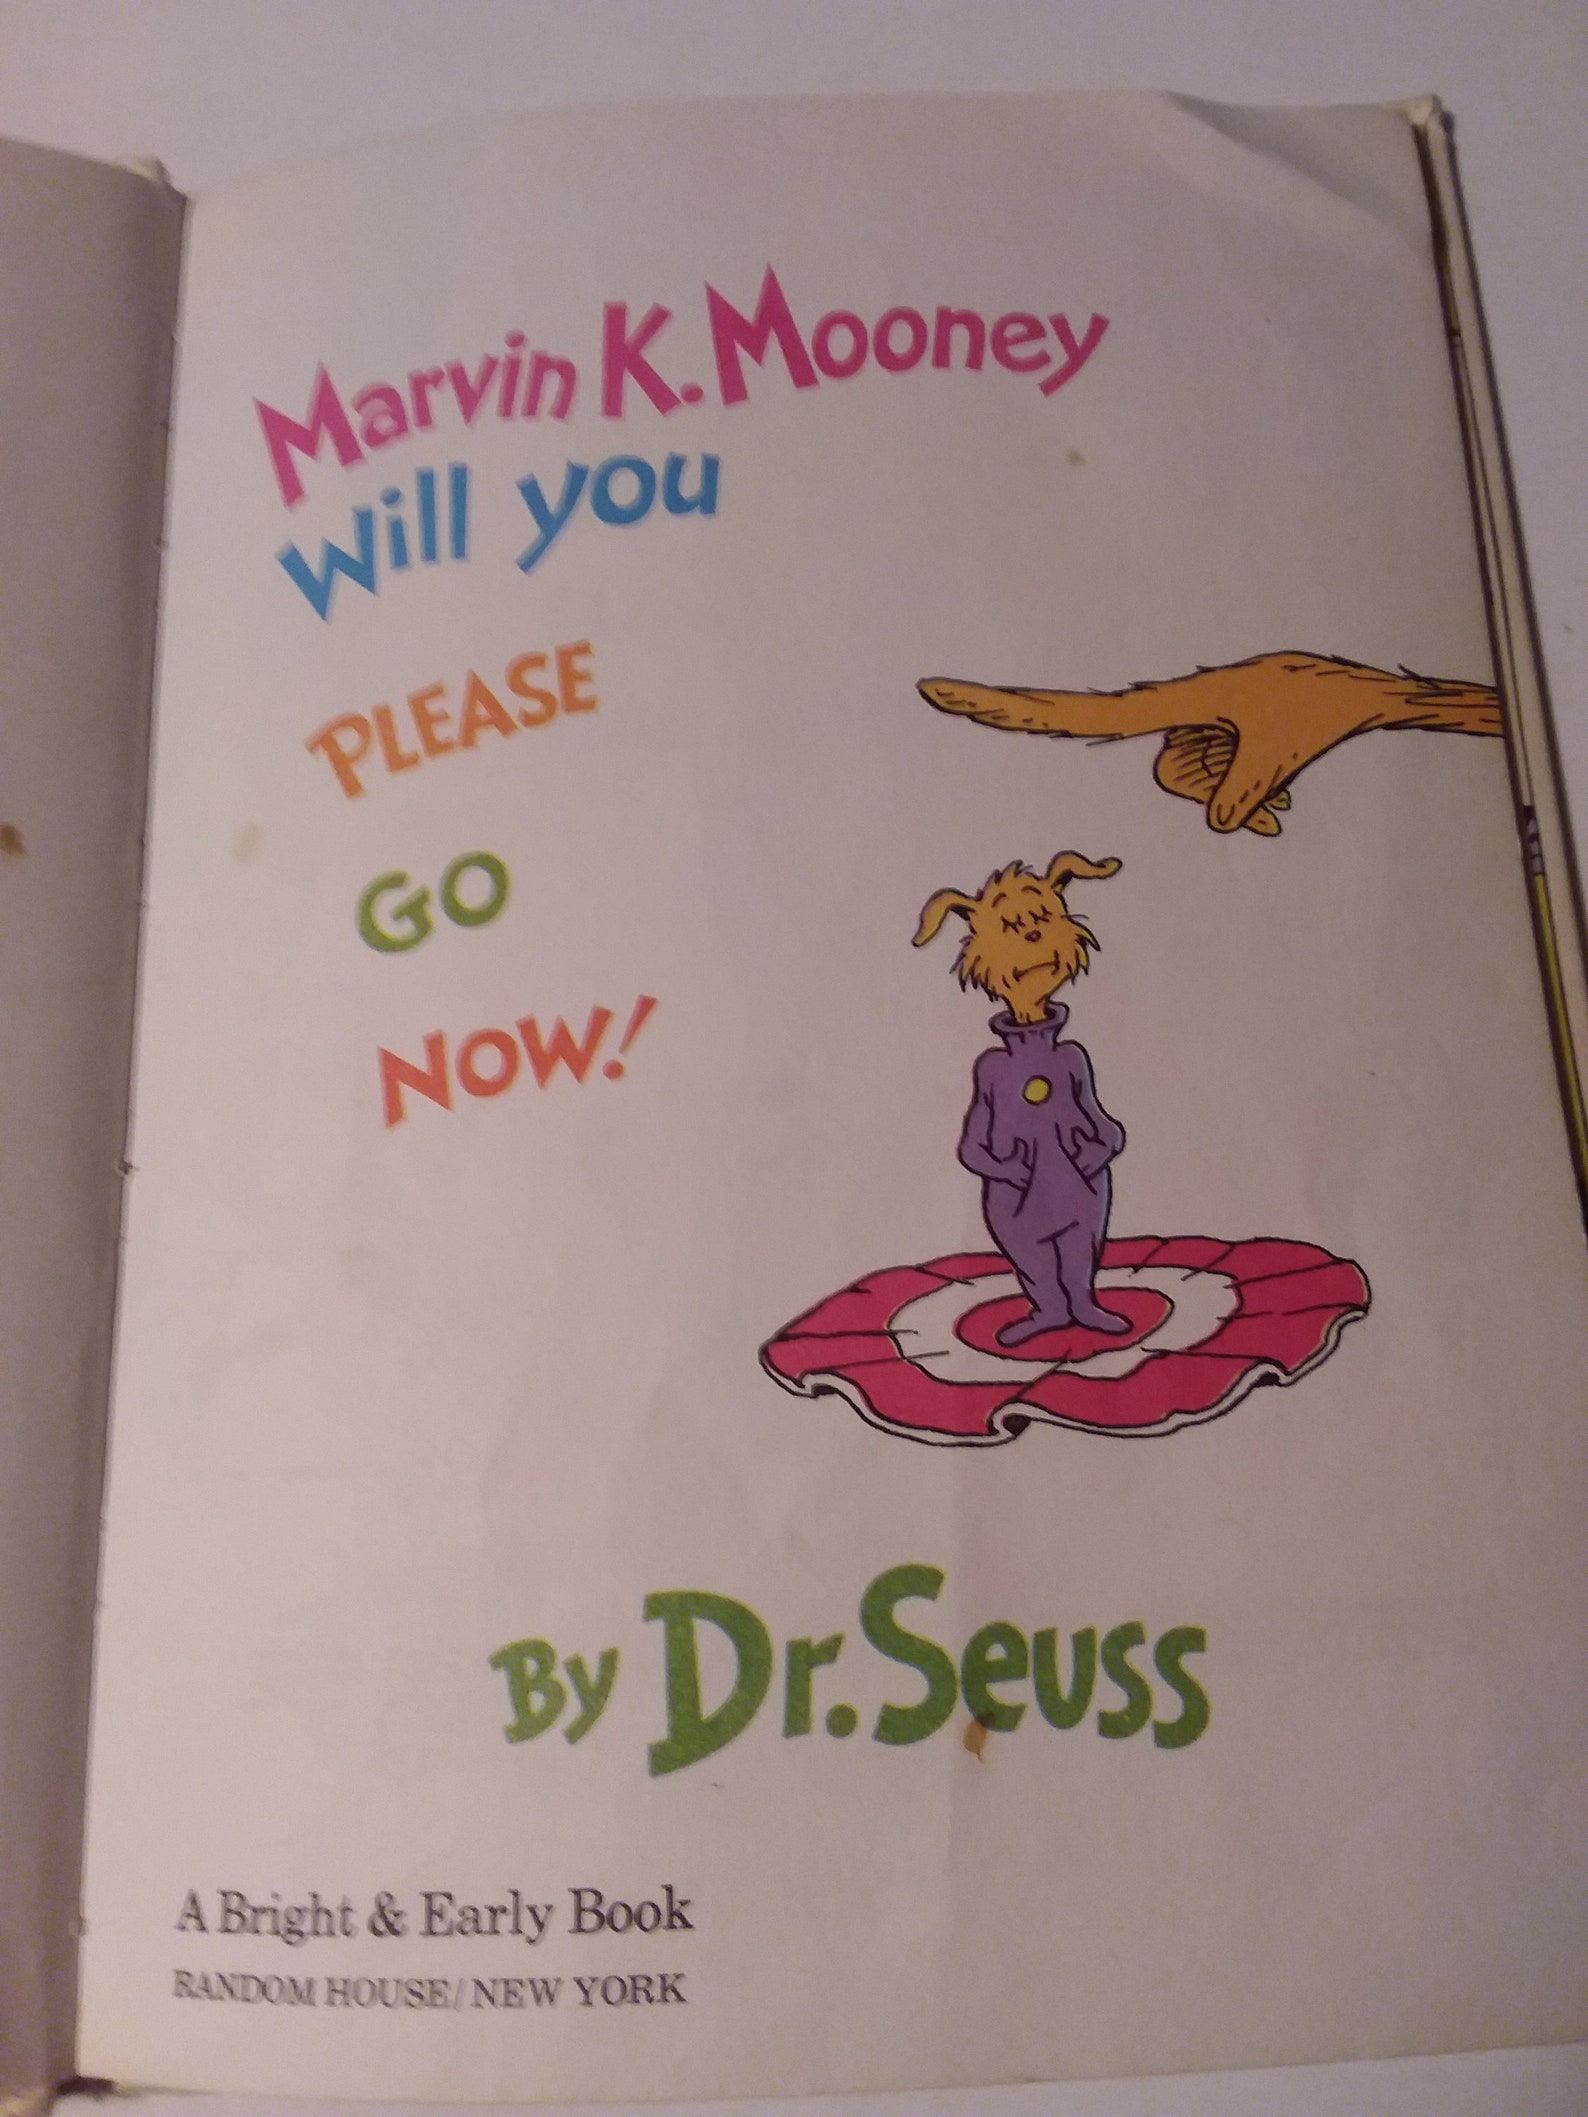 Marvin K. Mooney will you Please Go Now | Etsy